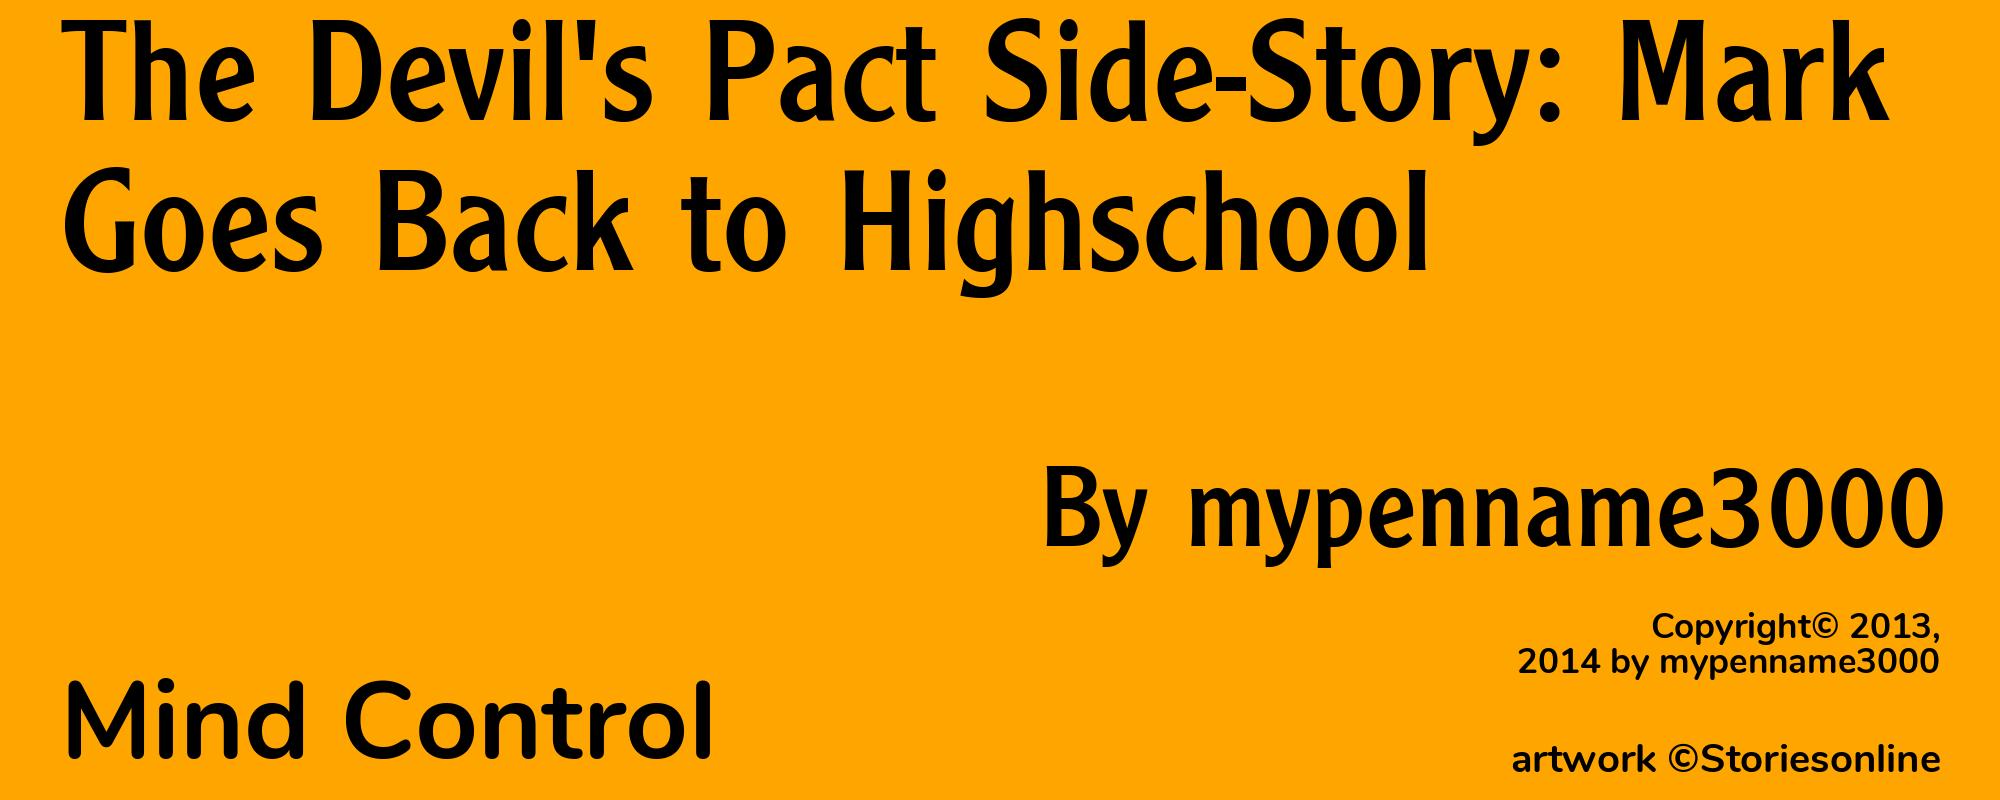 The Devil's Pact Side-Story: Mark Goes Back to Highschool - Cover